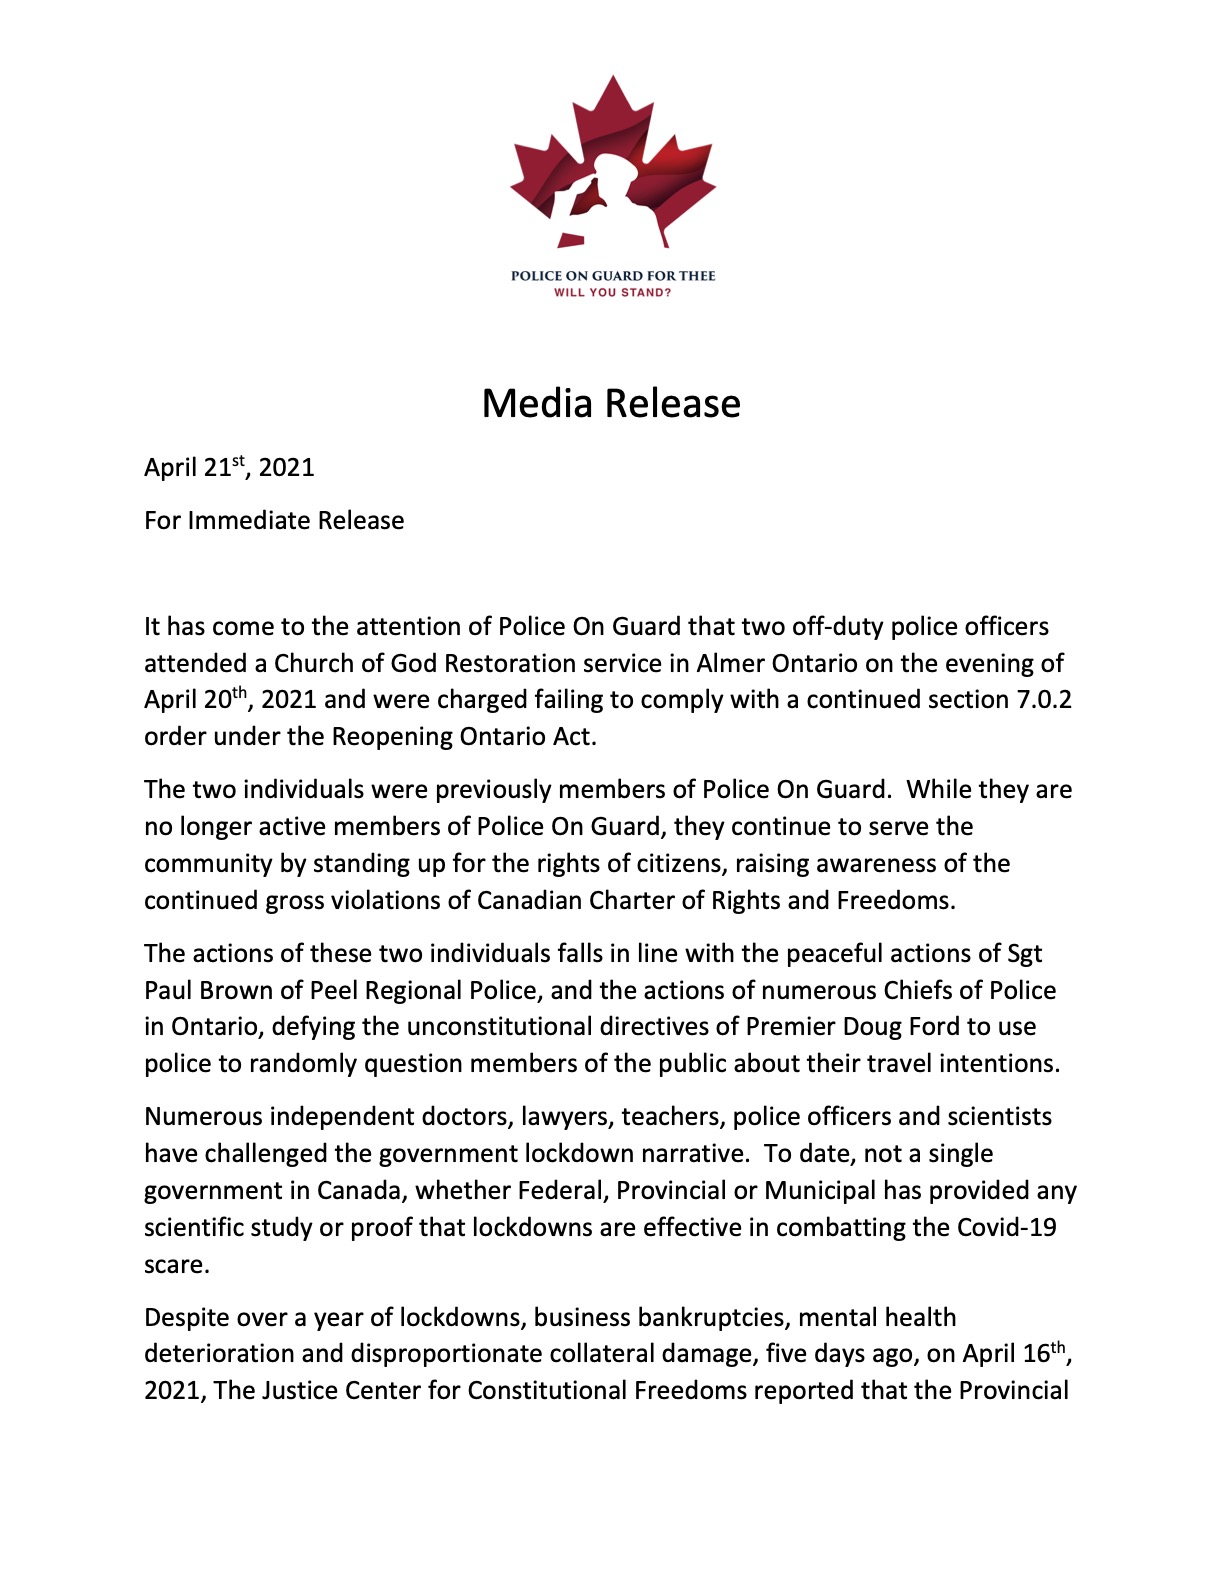 Police on Guard Media Release 